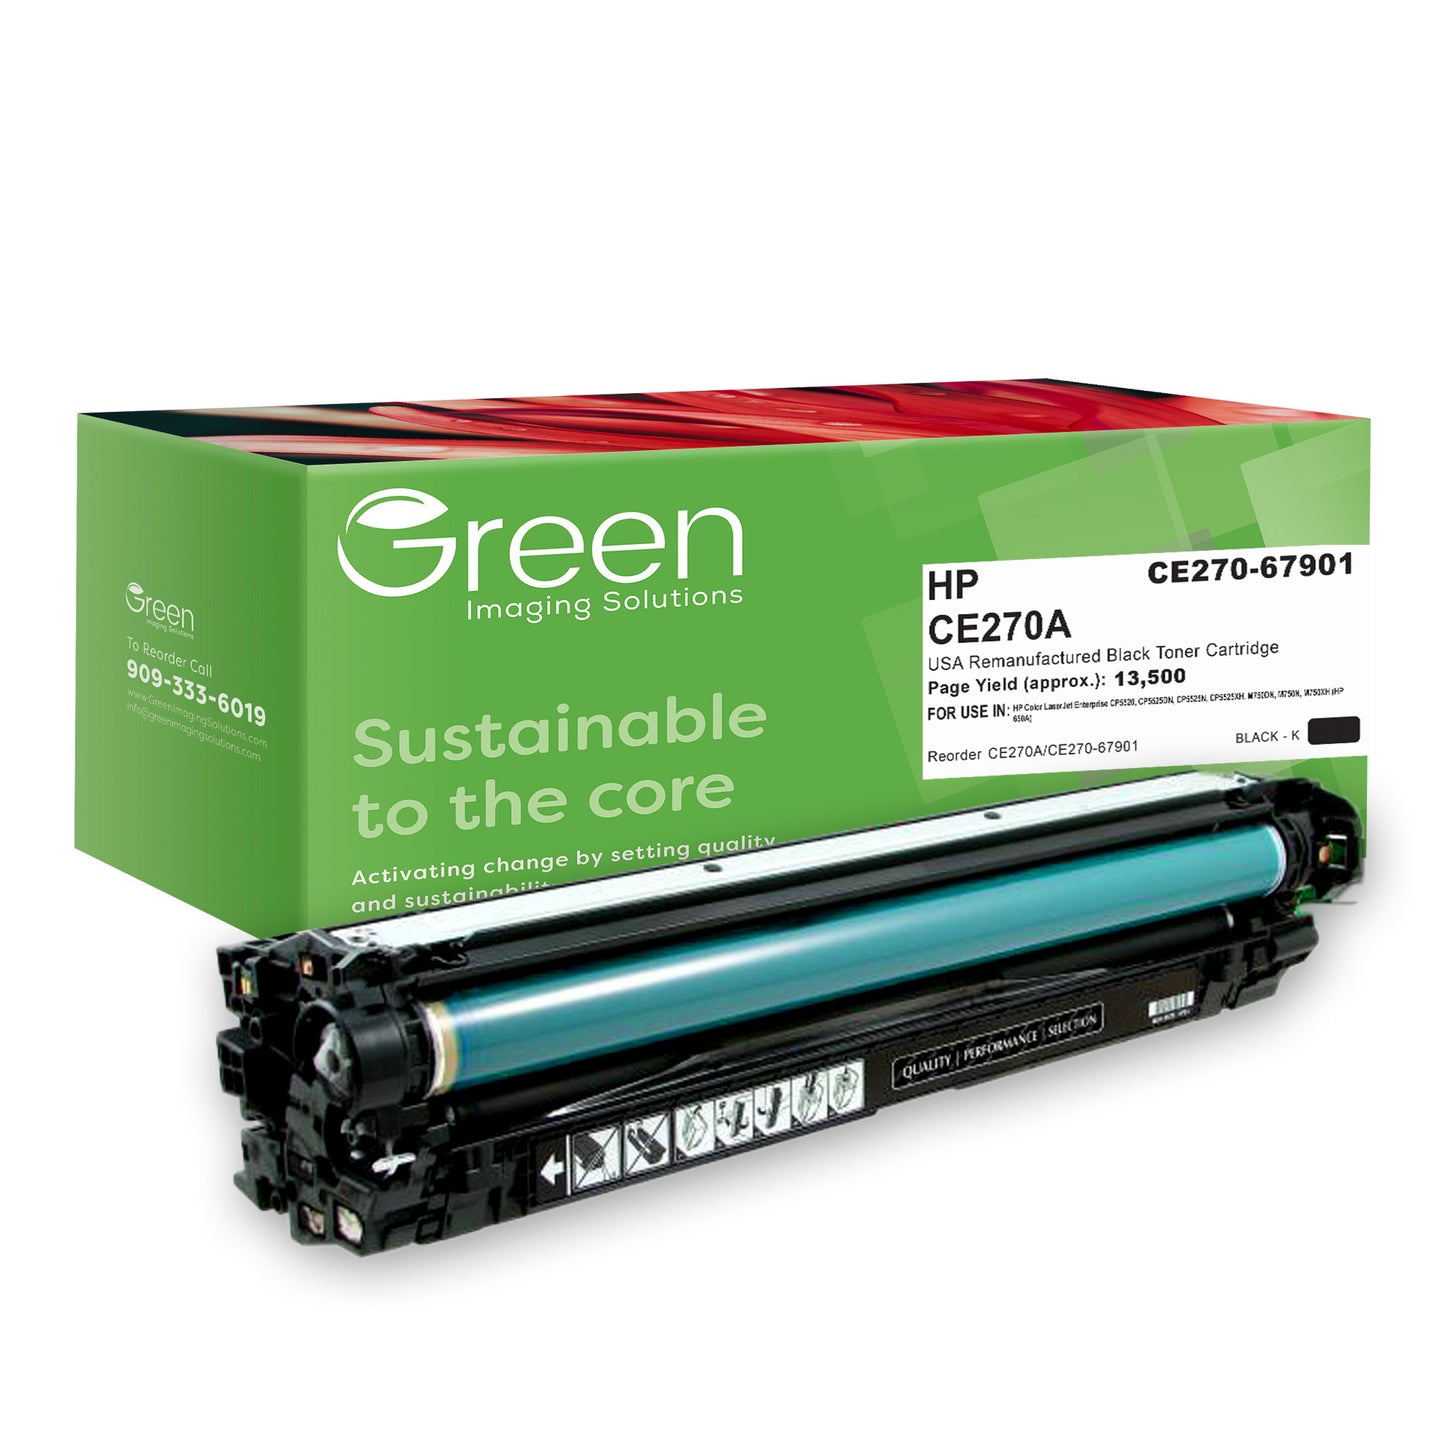 GIS USA Remanufactured Black Toner Cartridge for HP CE270A (HP 650A)